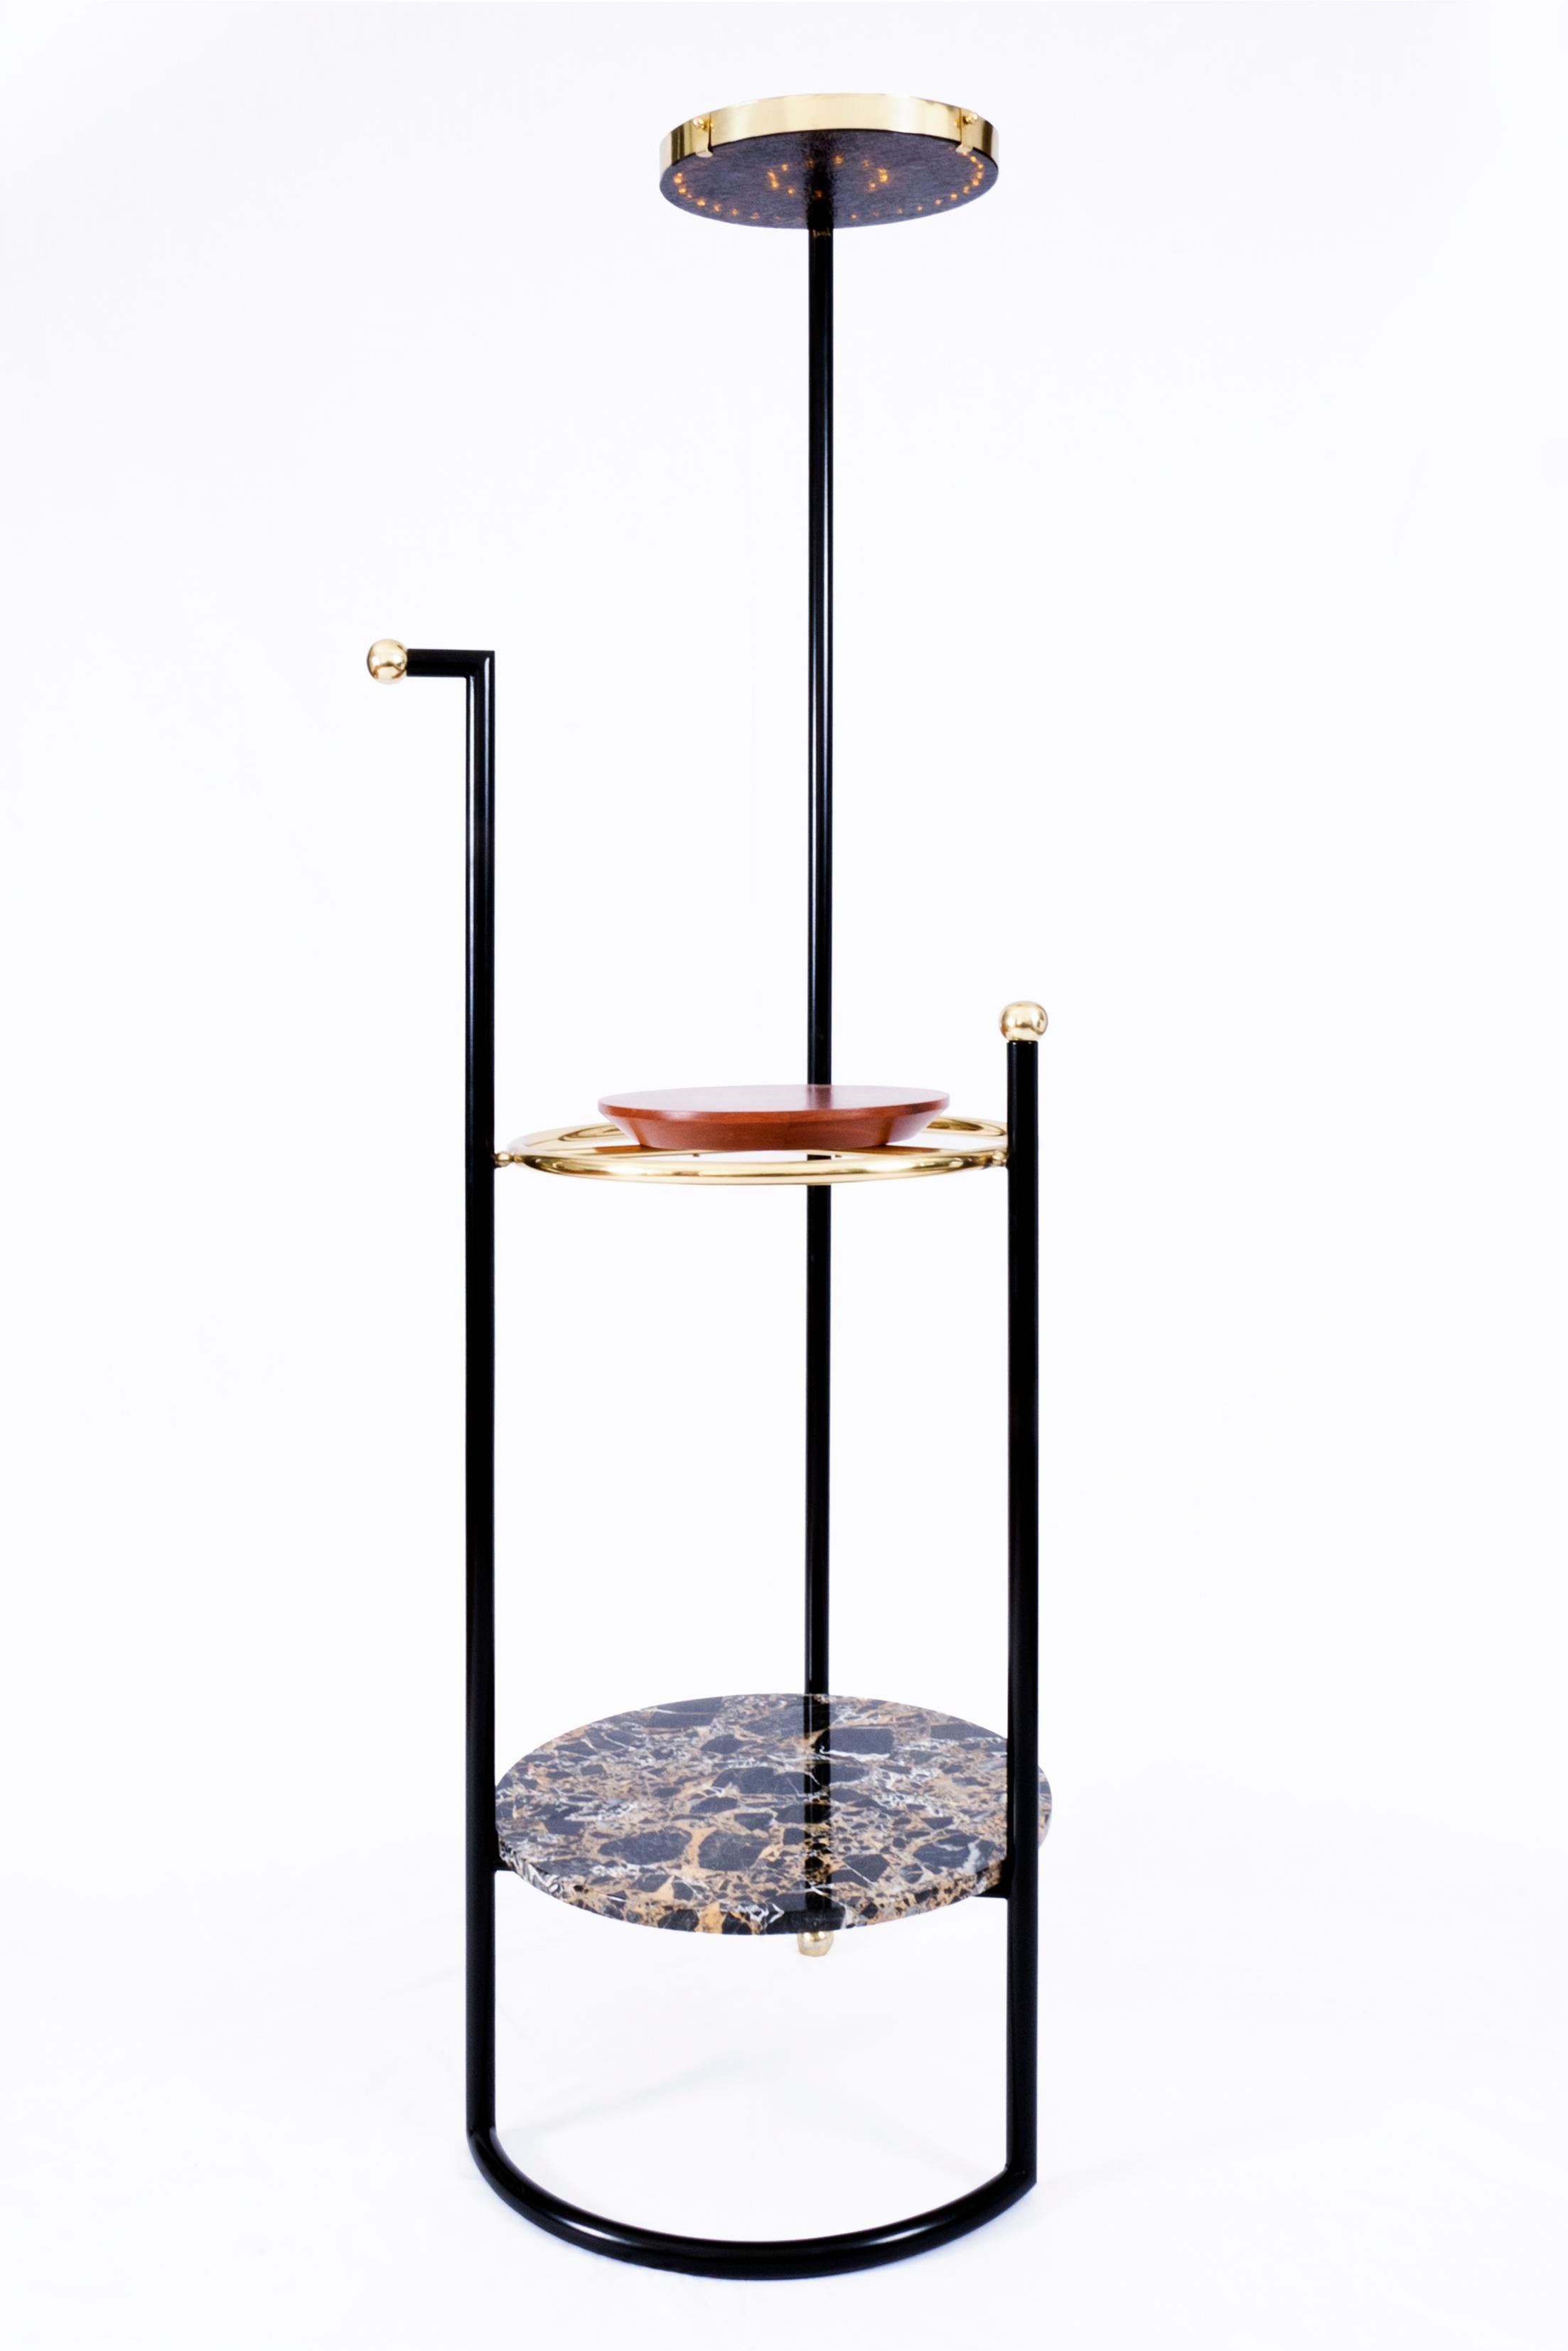 Saturne valet by Nomade Atelier
Dimensions: D 52 x H 180 cm
Material: Brass, Marble, Iron, Cedar, LED Lighting
Weight: 85 kg

All our lamps can be wired according to each country. If sold to the USA it will be wired for the USA for